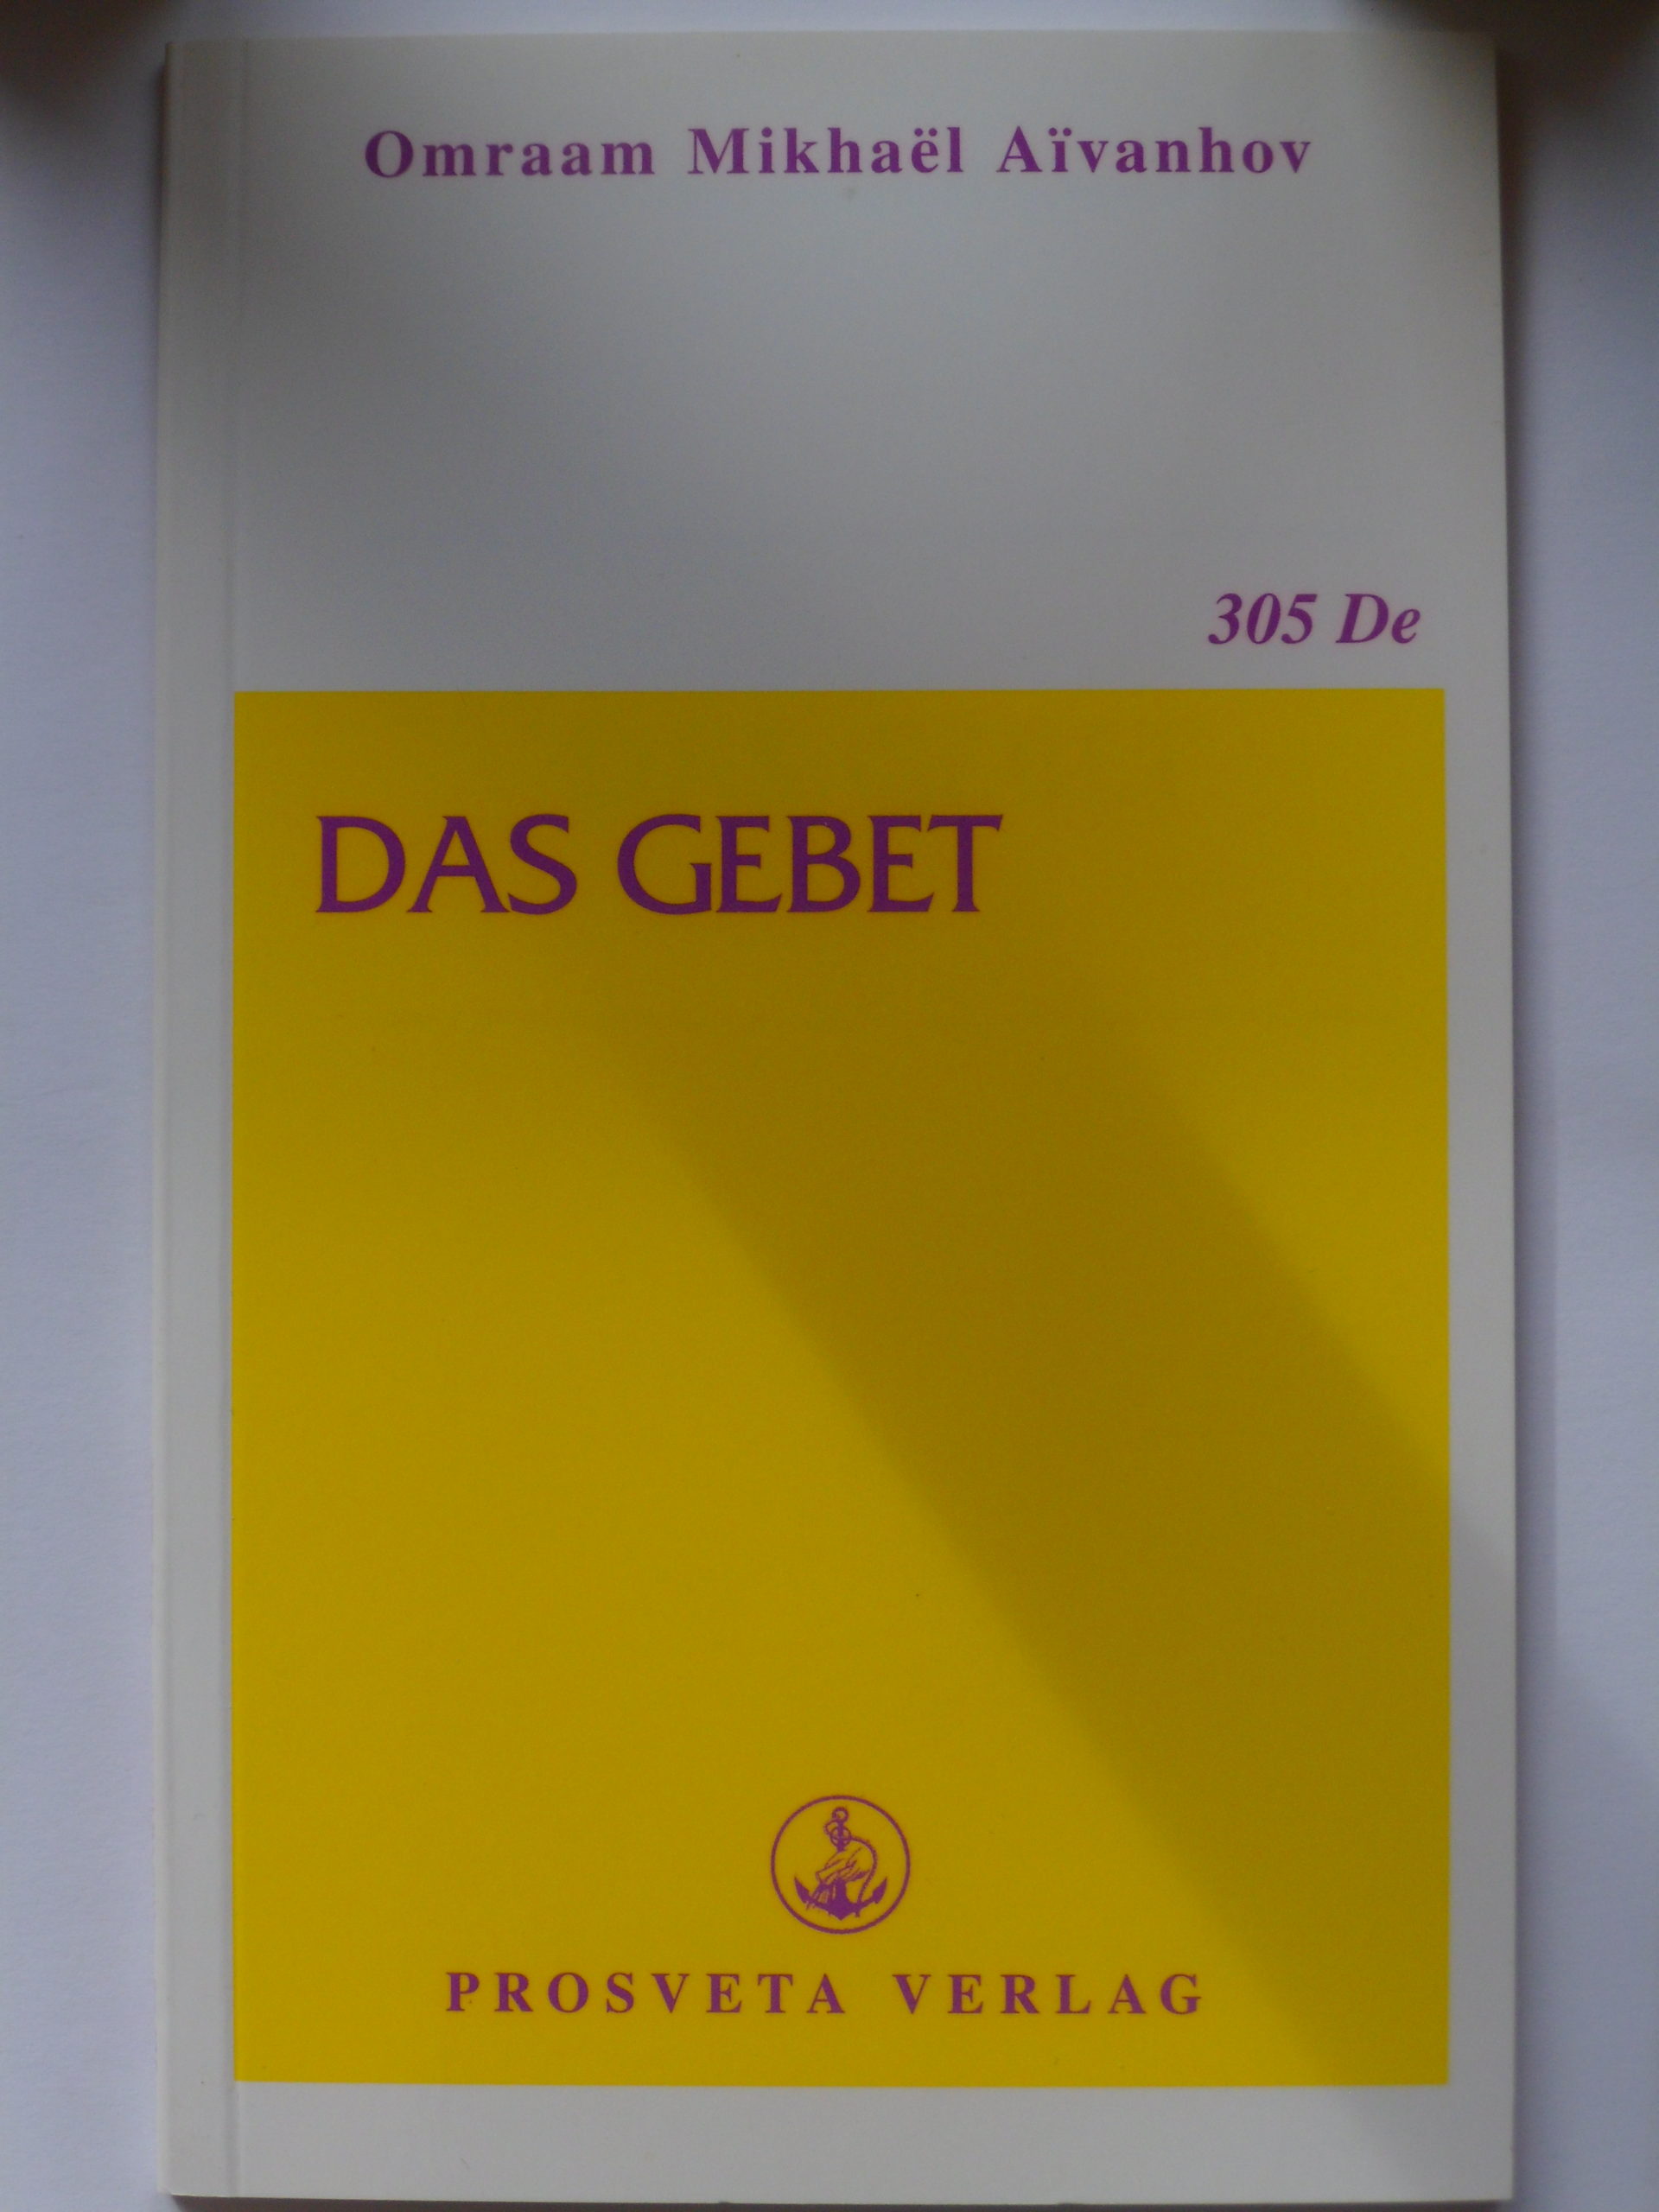 You are currently viewing Das Gebet